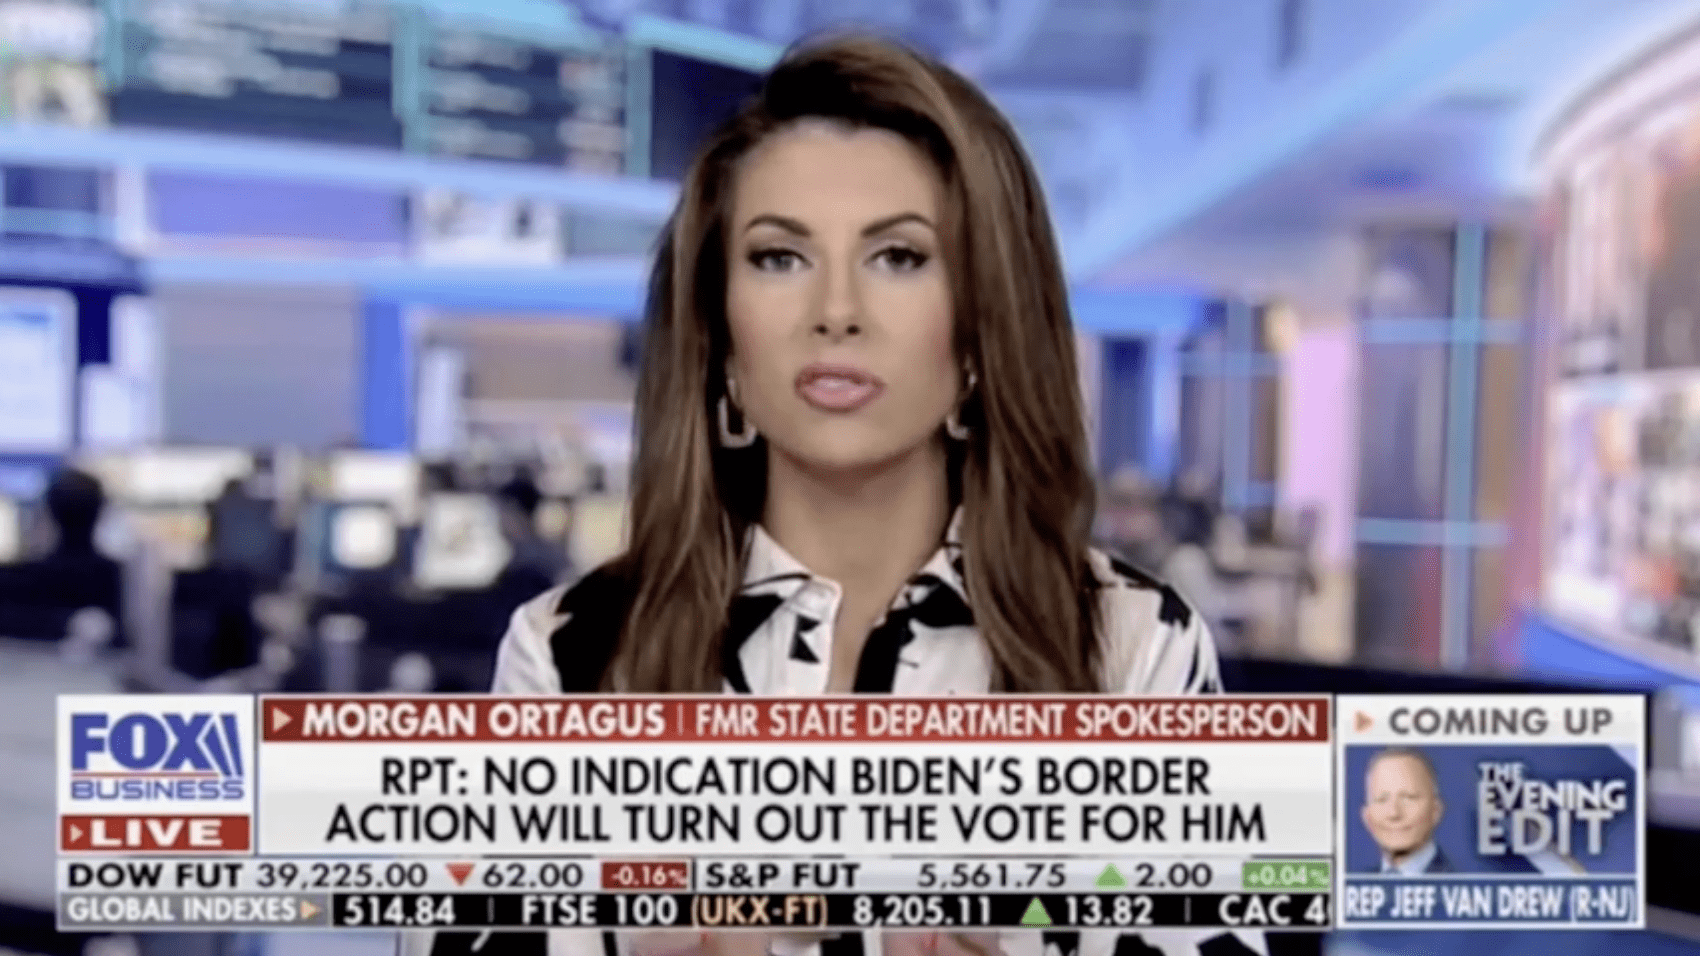 Morgan Ortagus Joins The Evening Edit on Fox Business